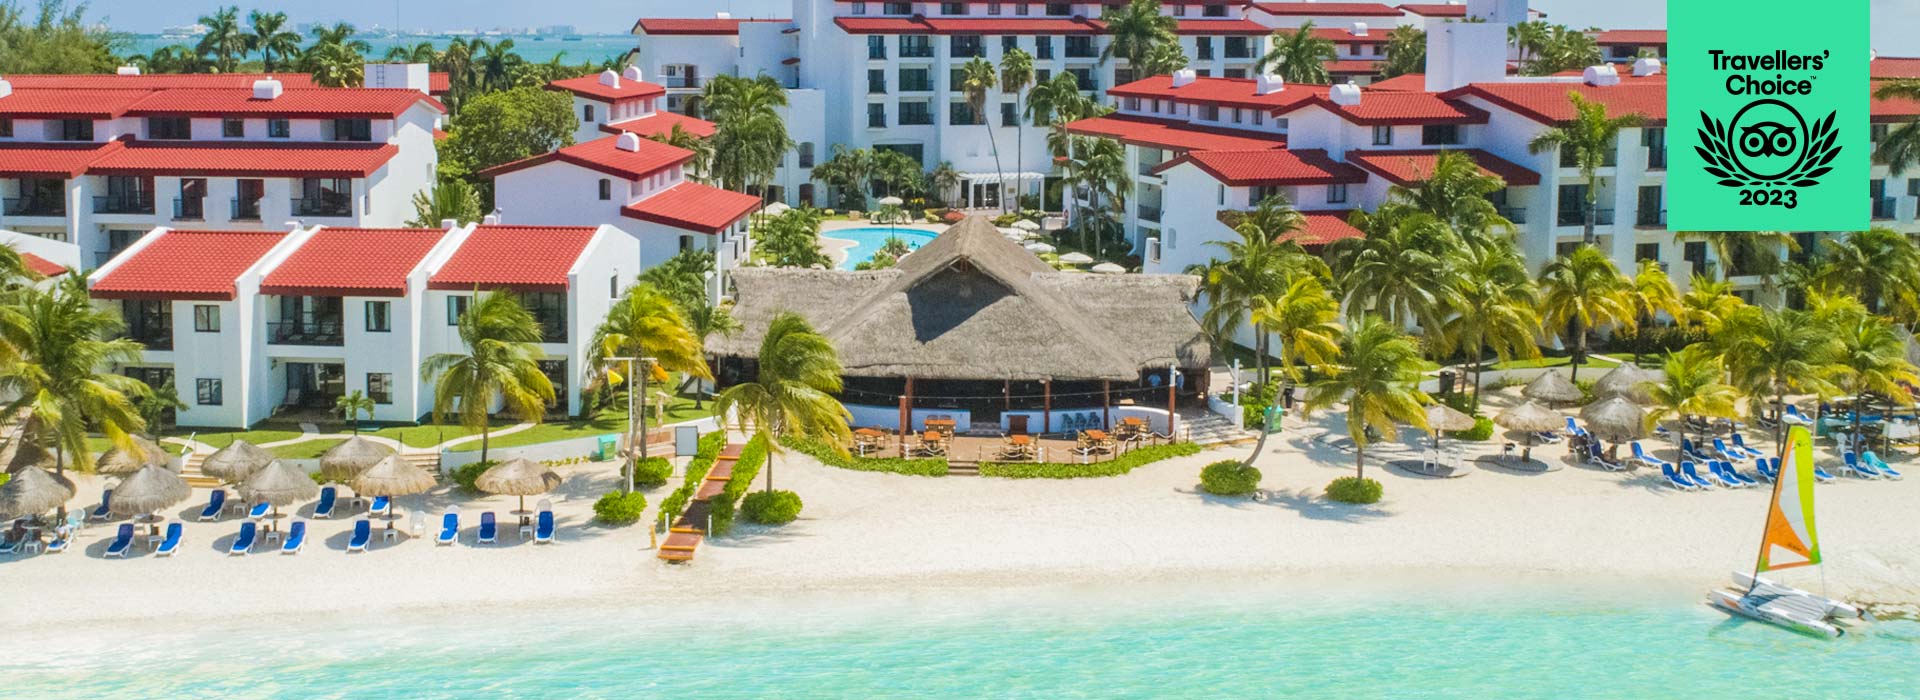 Family Resorts in Cancun